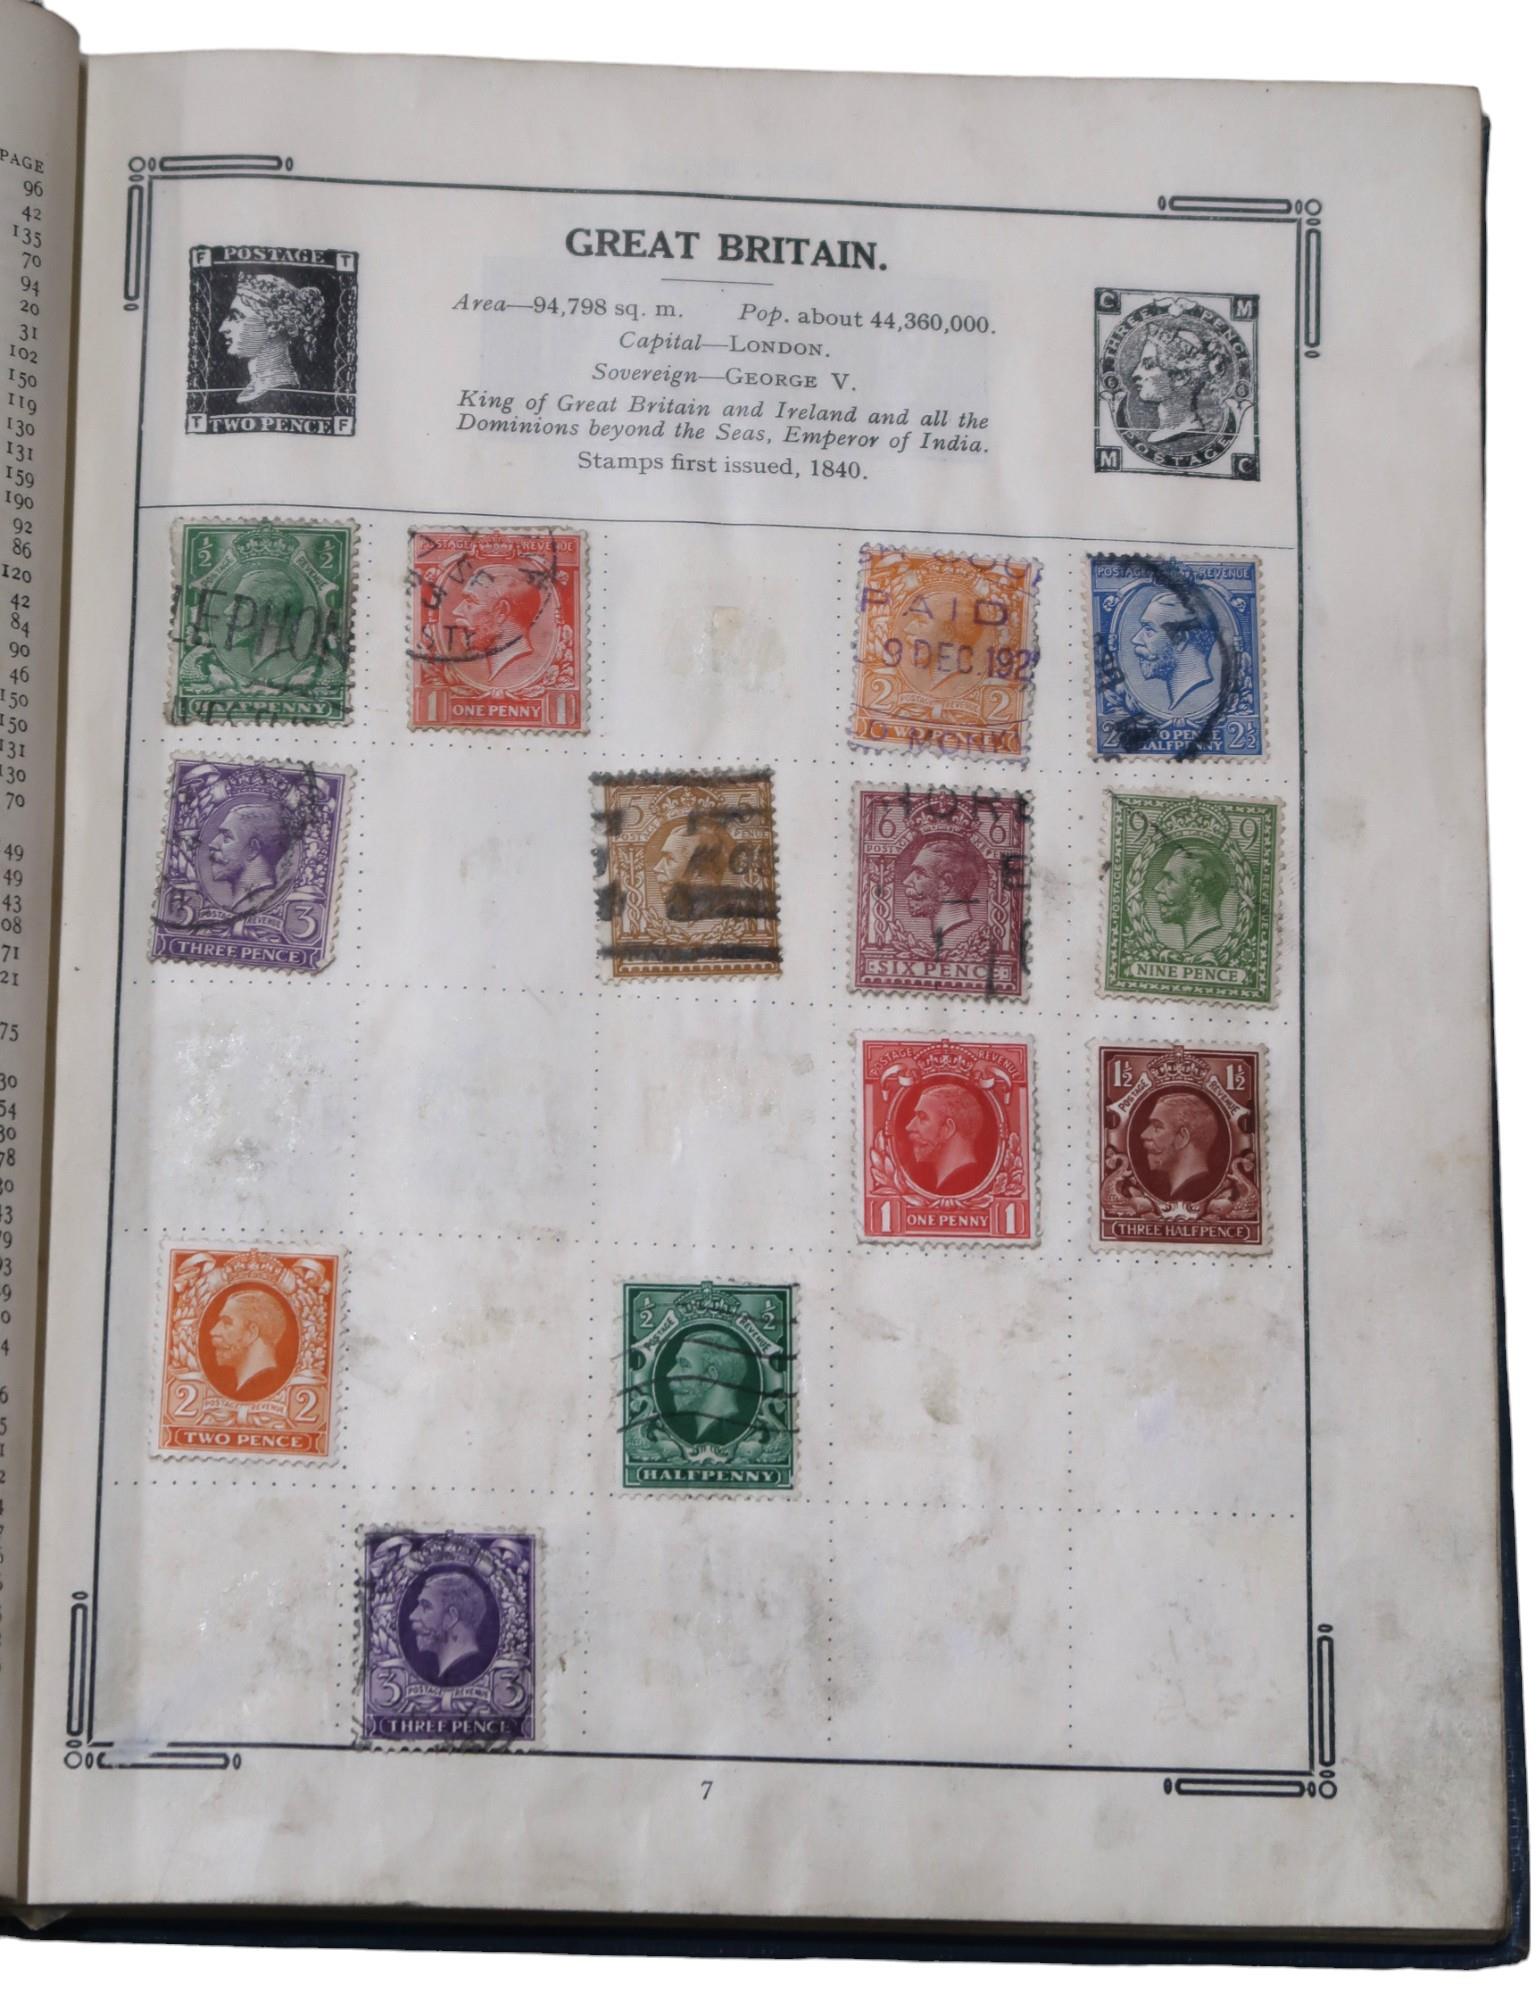 Stanley Gibbons The Improved Stamp Album to include Great Britain 1/d red, 1/d lilac, Victoria 1/ - Image 20 of 20